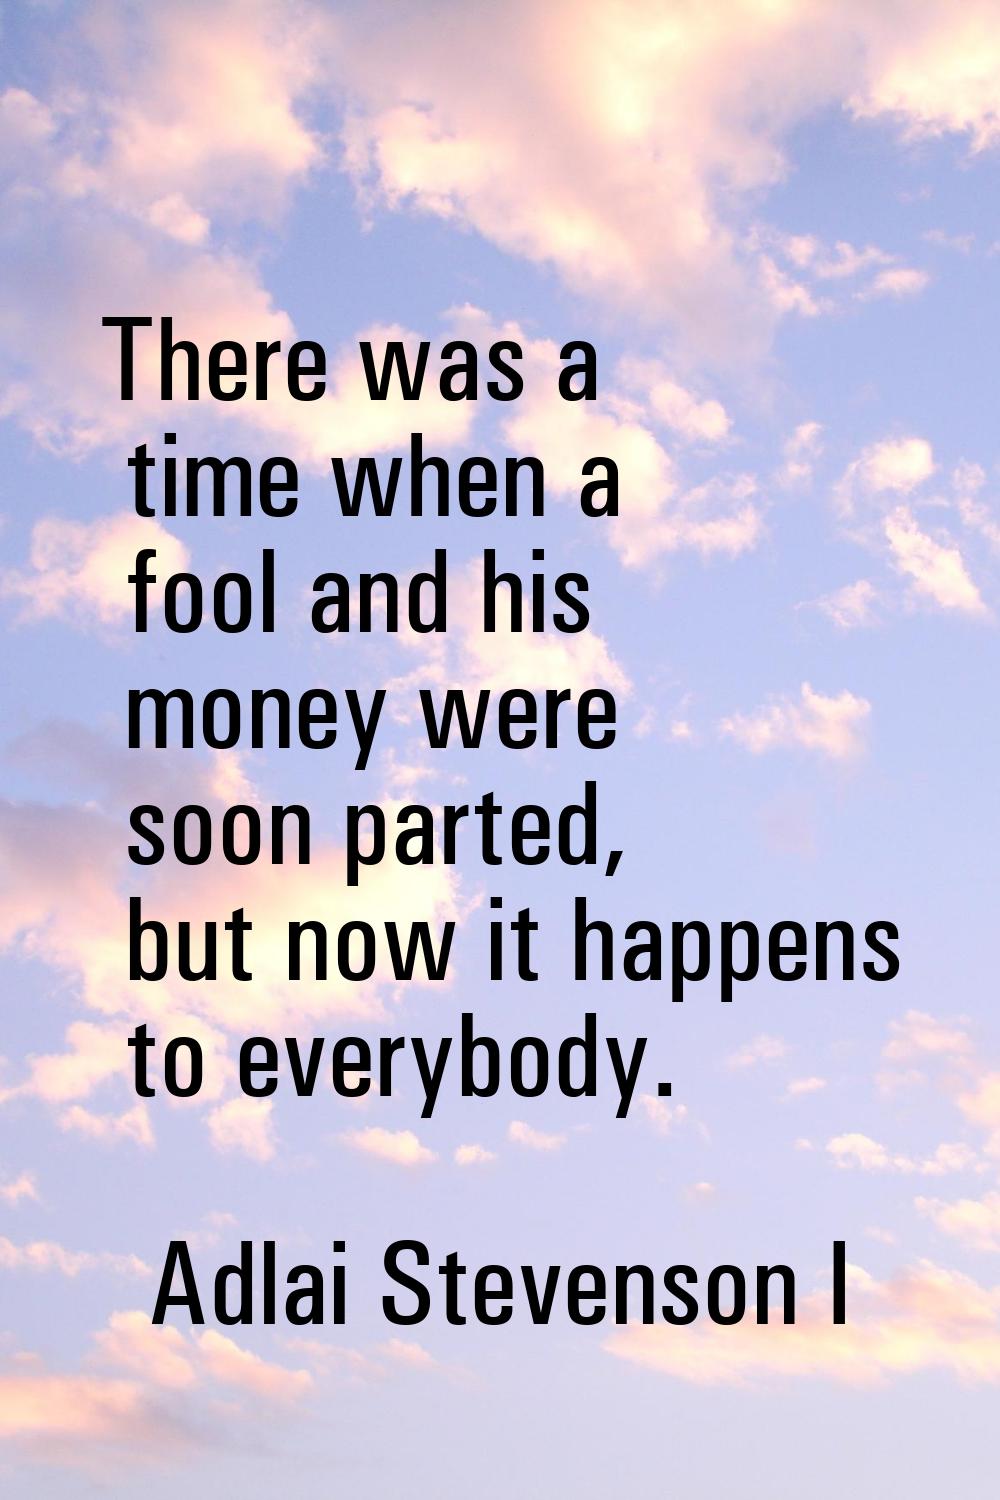 There was a time when a fool and his money were soon parted, but now it happens to everybody.